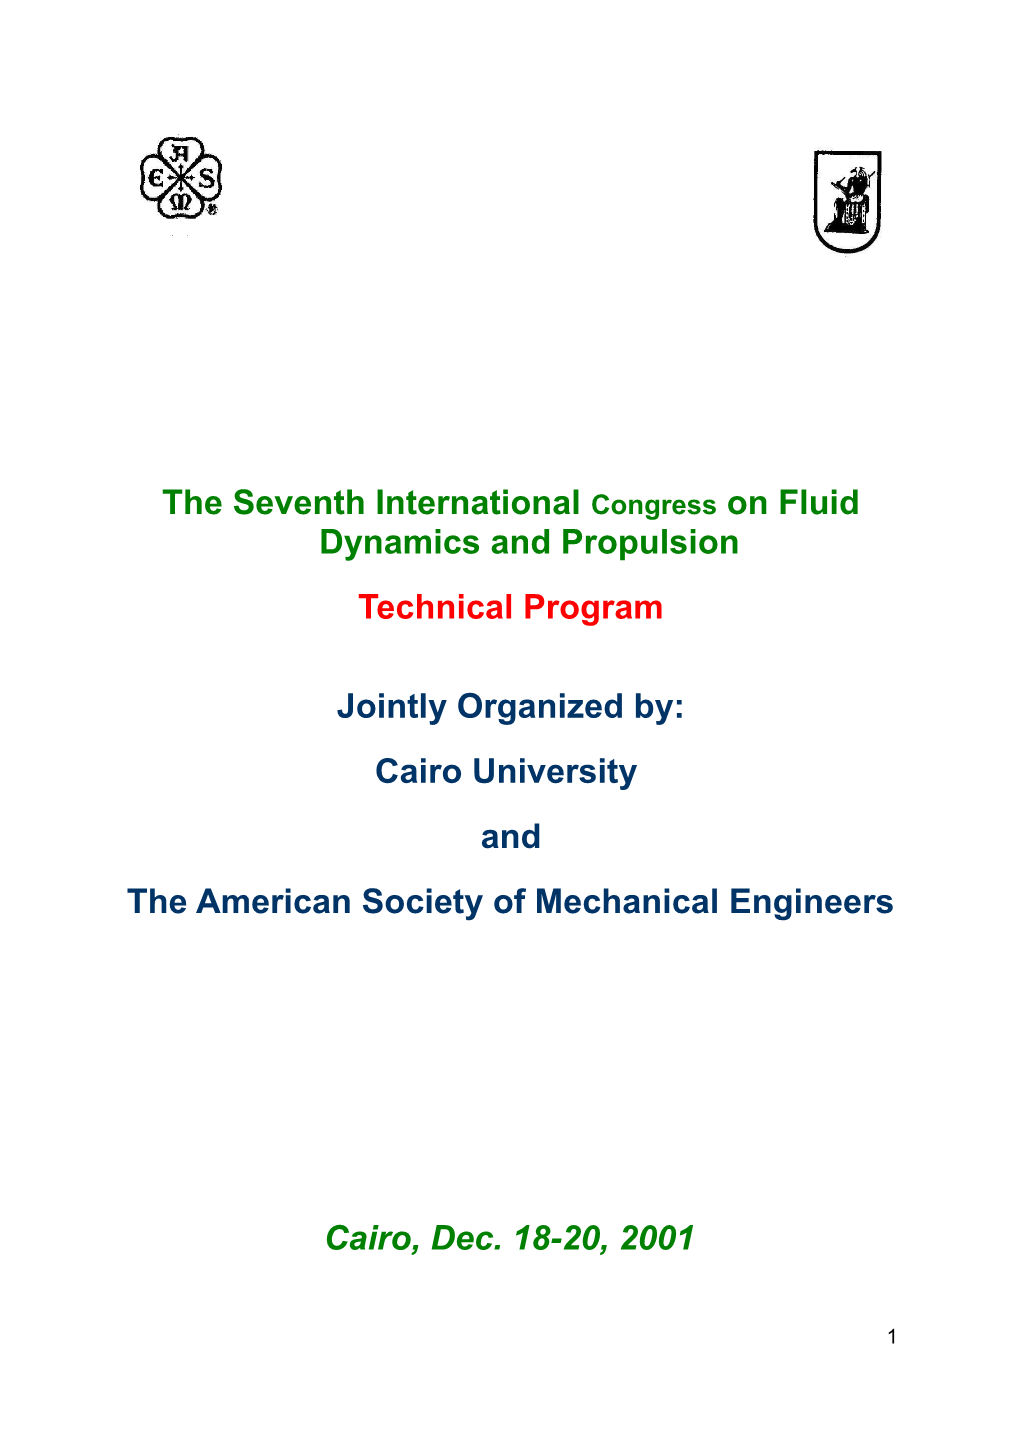 The Seventh International Congress on Fluid Dynamics and Propulsion